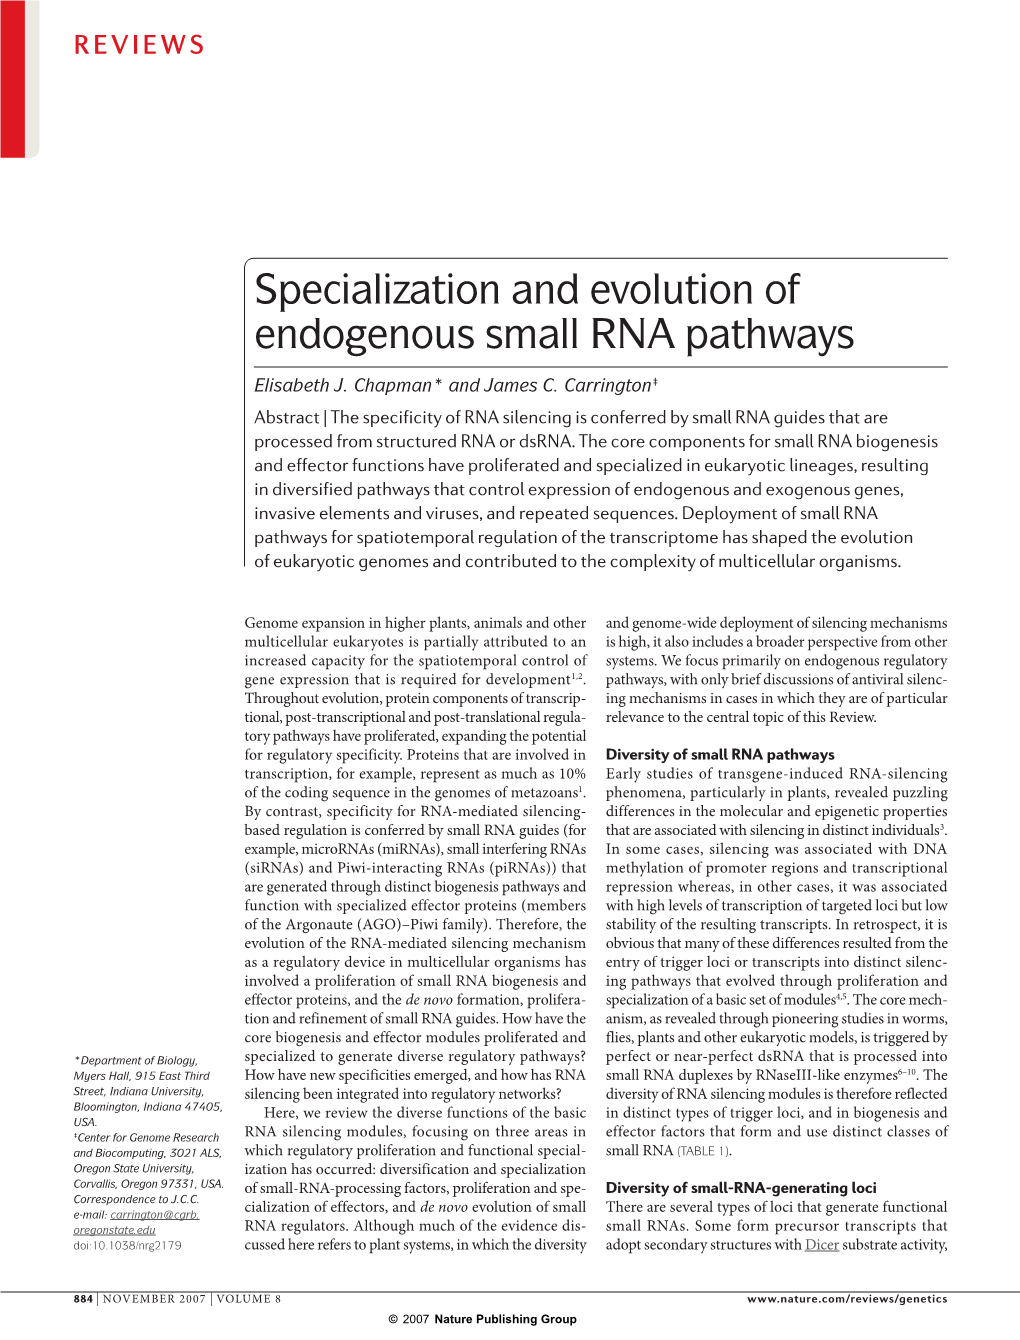 Specialization and Evolution of Endogenous Small RNA Pathways